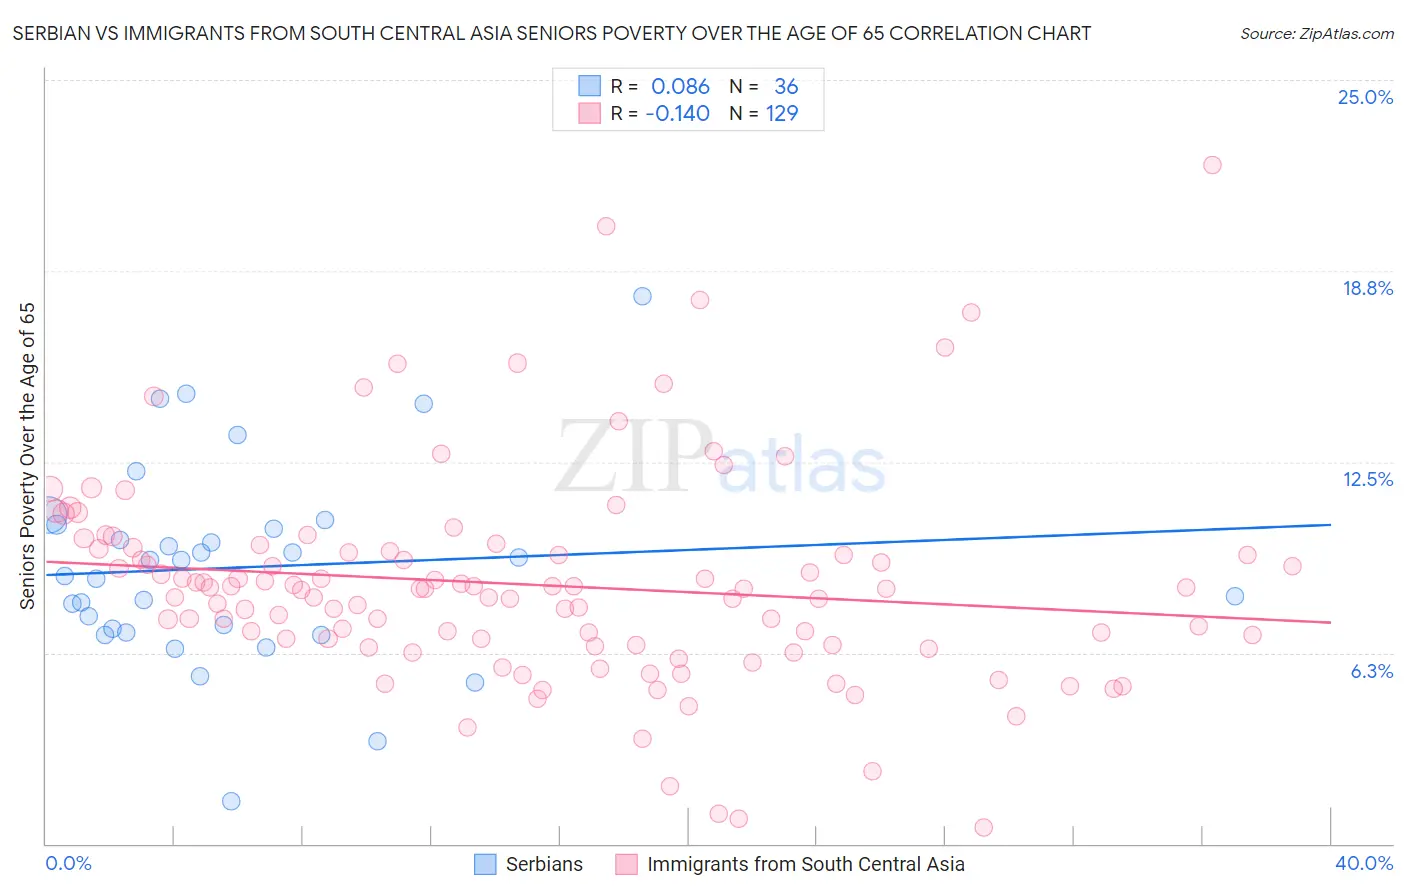 Serbian vs Immigrants from South Central Asia Seniors Poverty Over the Age of 65